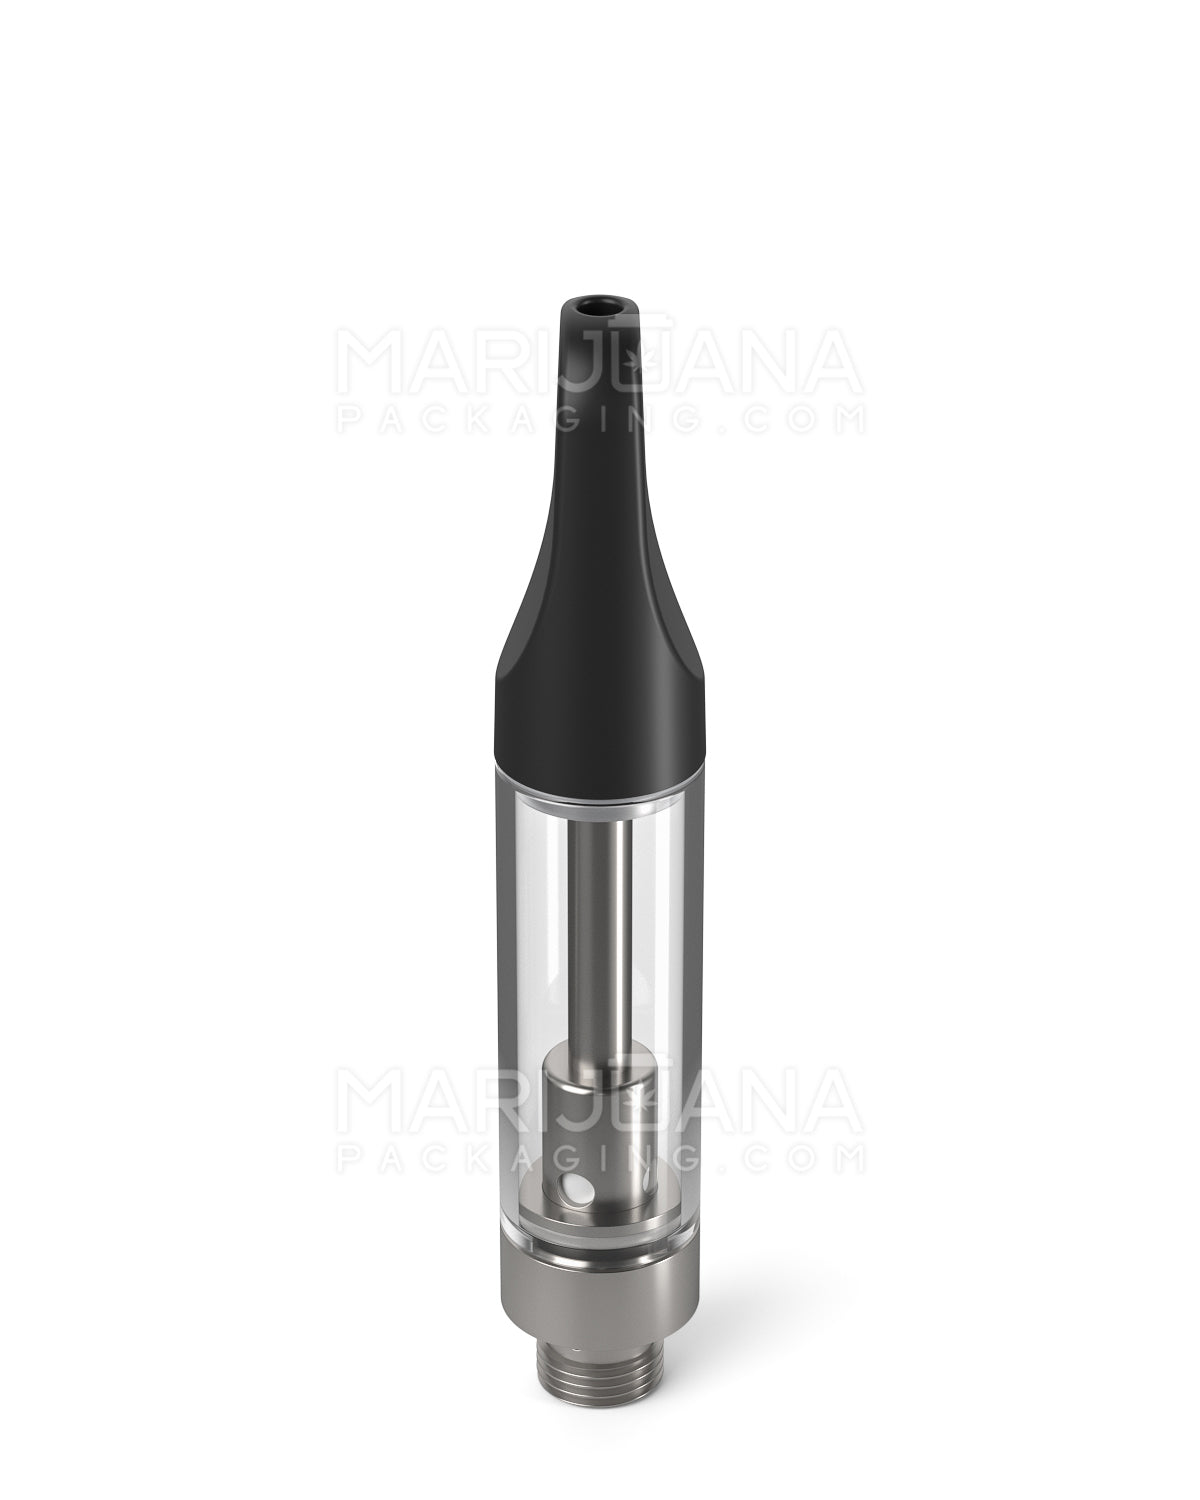 CCELL | Liquid6 Reactor Glass Vape Cartridge with Black Plastic Mouthpiece | 1mL - Screw On - 100 Count - 4